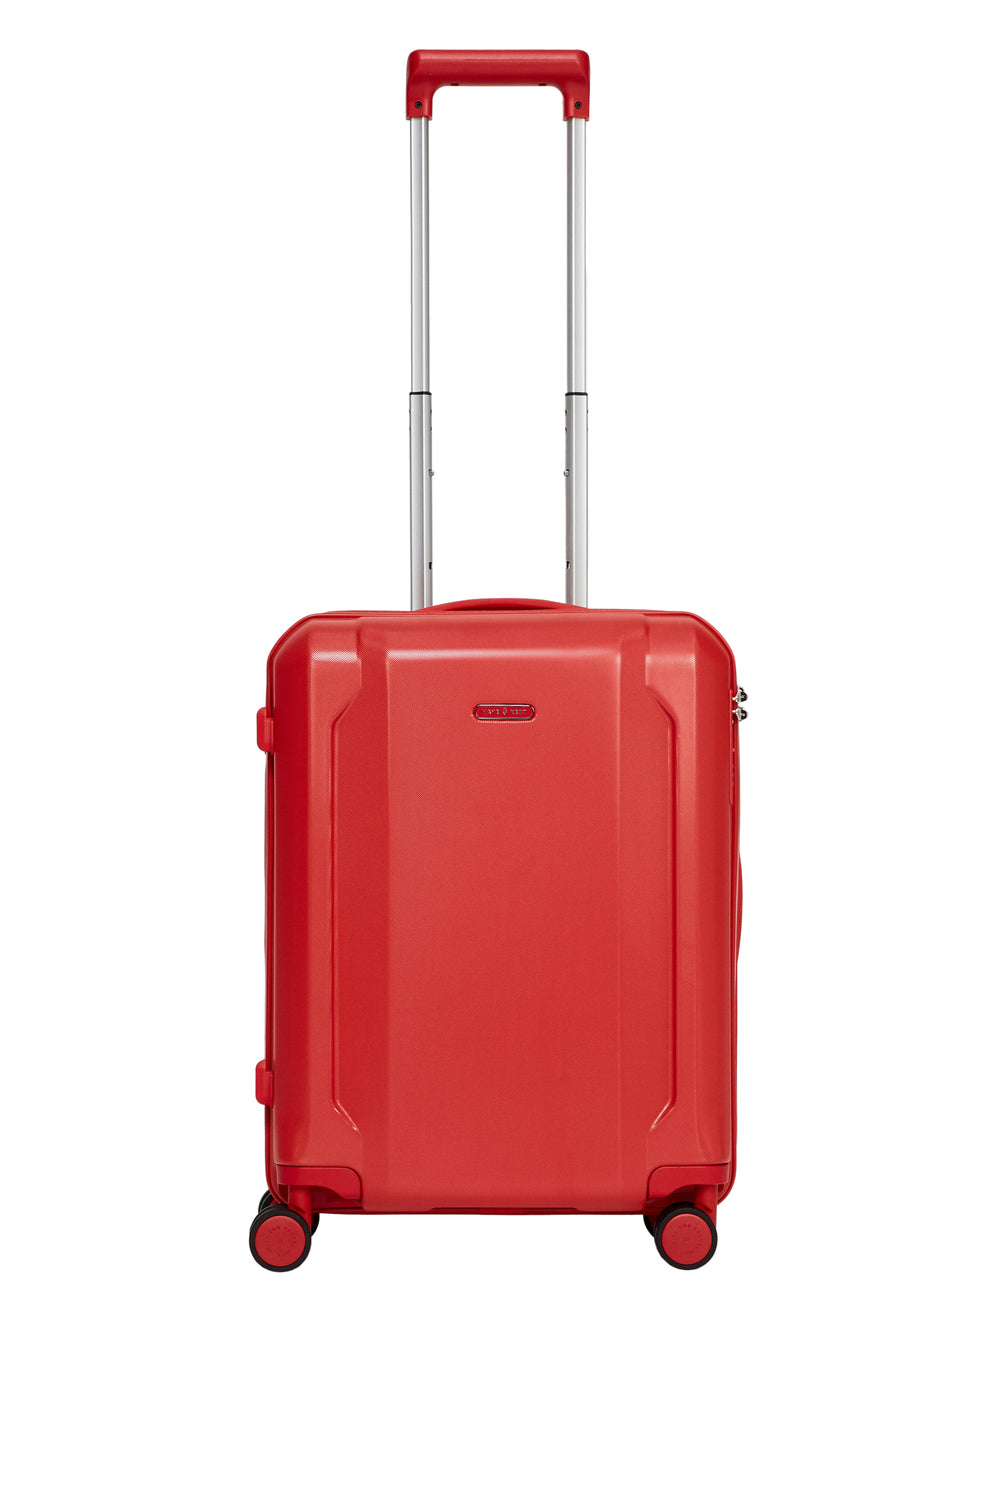 Smart suitcase Small size Red Kiss HAVE A REST